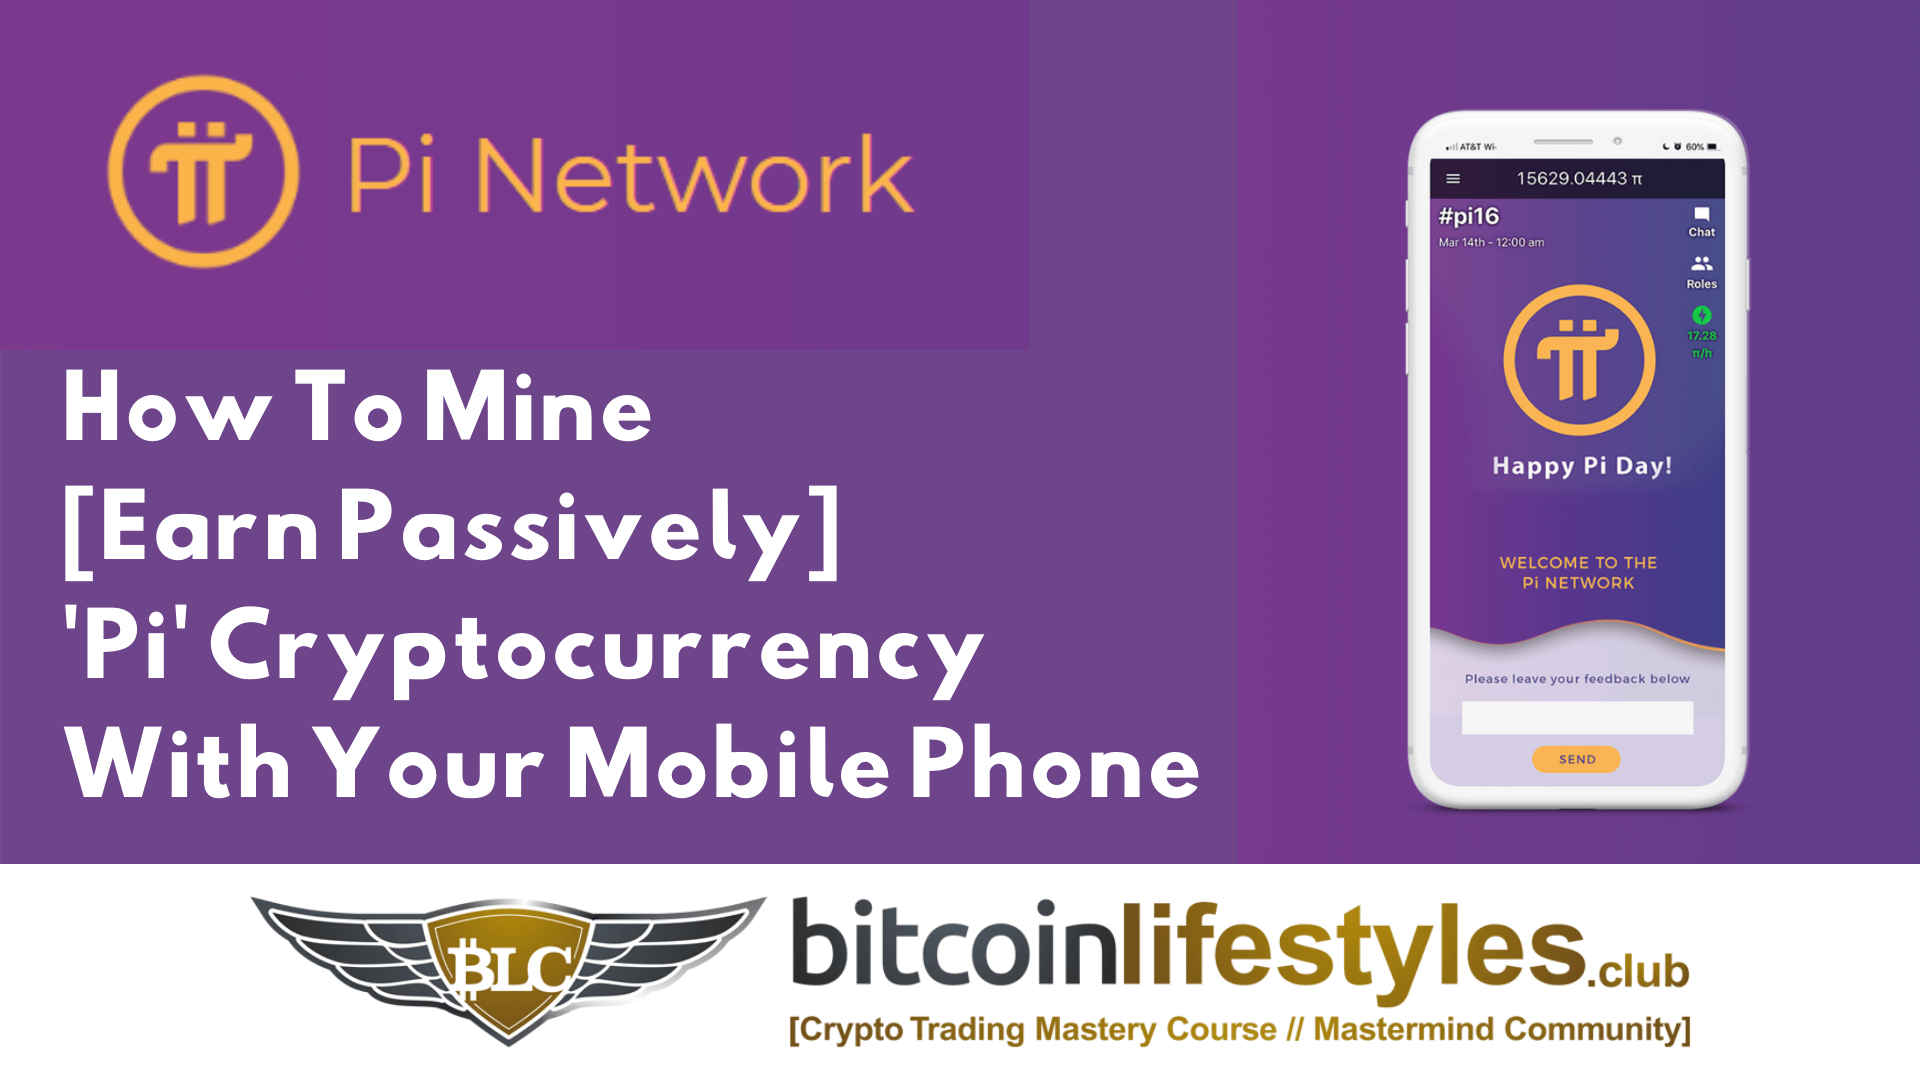 How-To-Mine-Pi-Cryptocurrency-with-mobile-phone-1